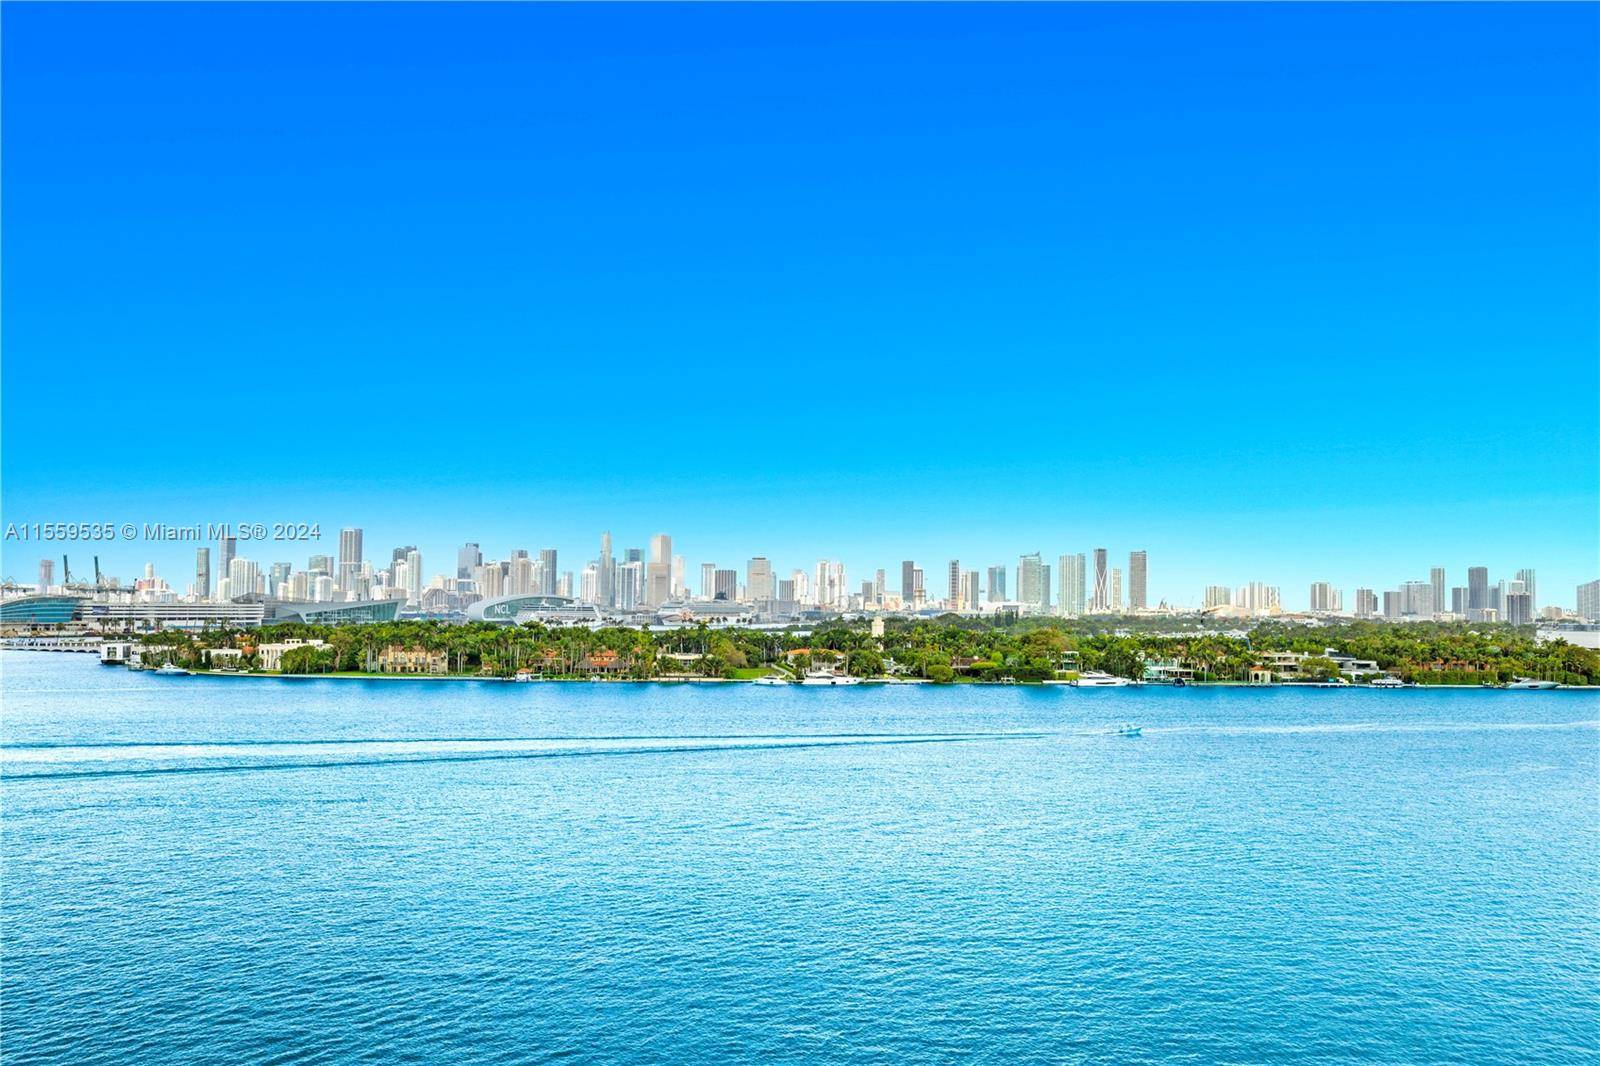 Exclusively available from April 20th to November 30th, this sought after corner unit boasts panoramic views of the bay, ocean, downtown Miami from its expansive wrap around balcony.